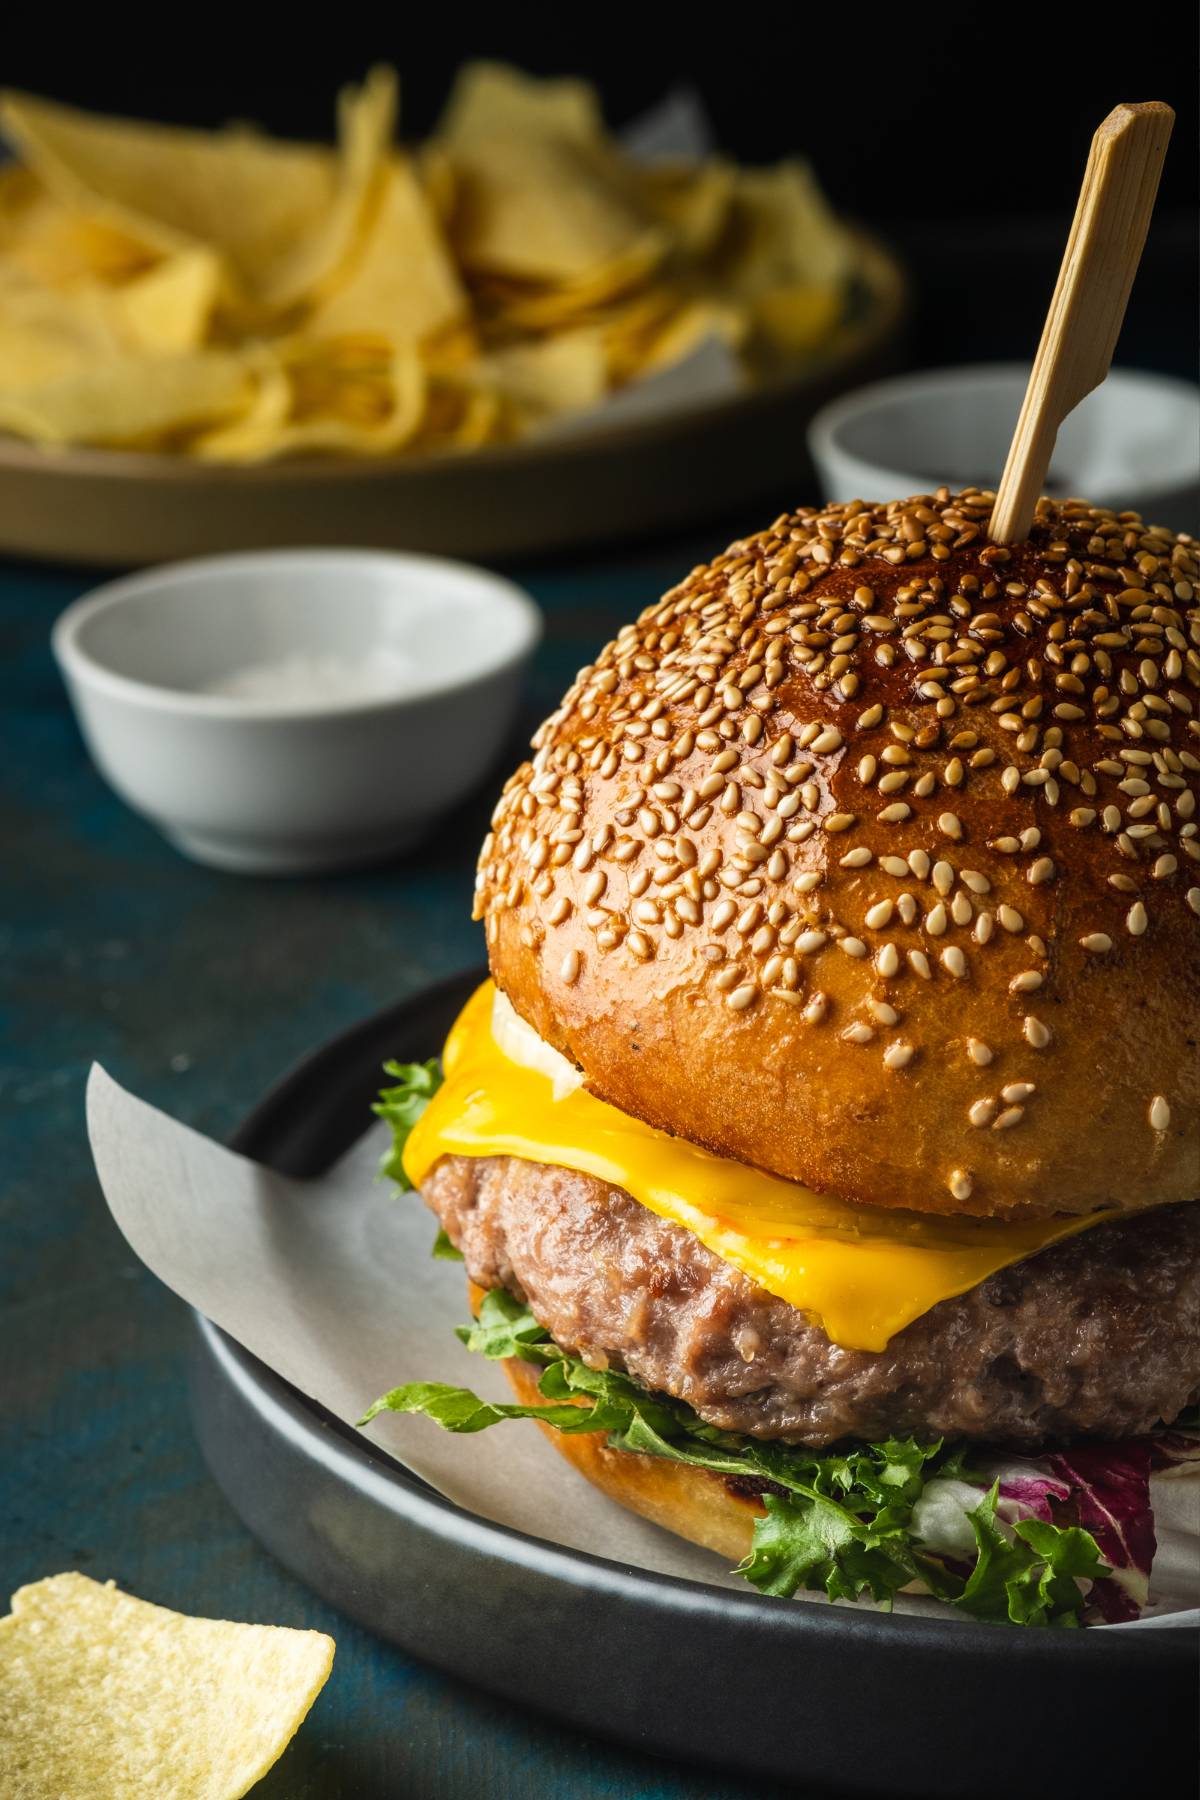 Easy Burger Dinner Ideas for Your Next Get-Together: Top 15